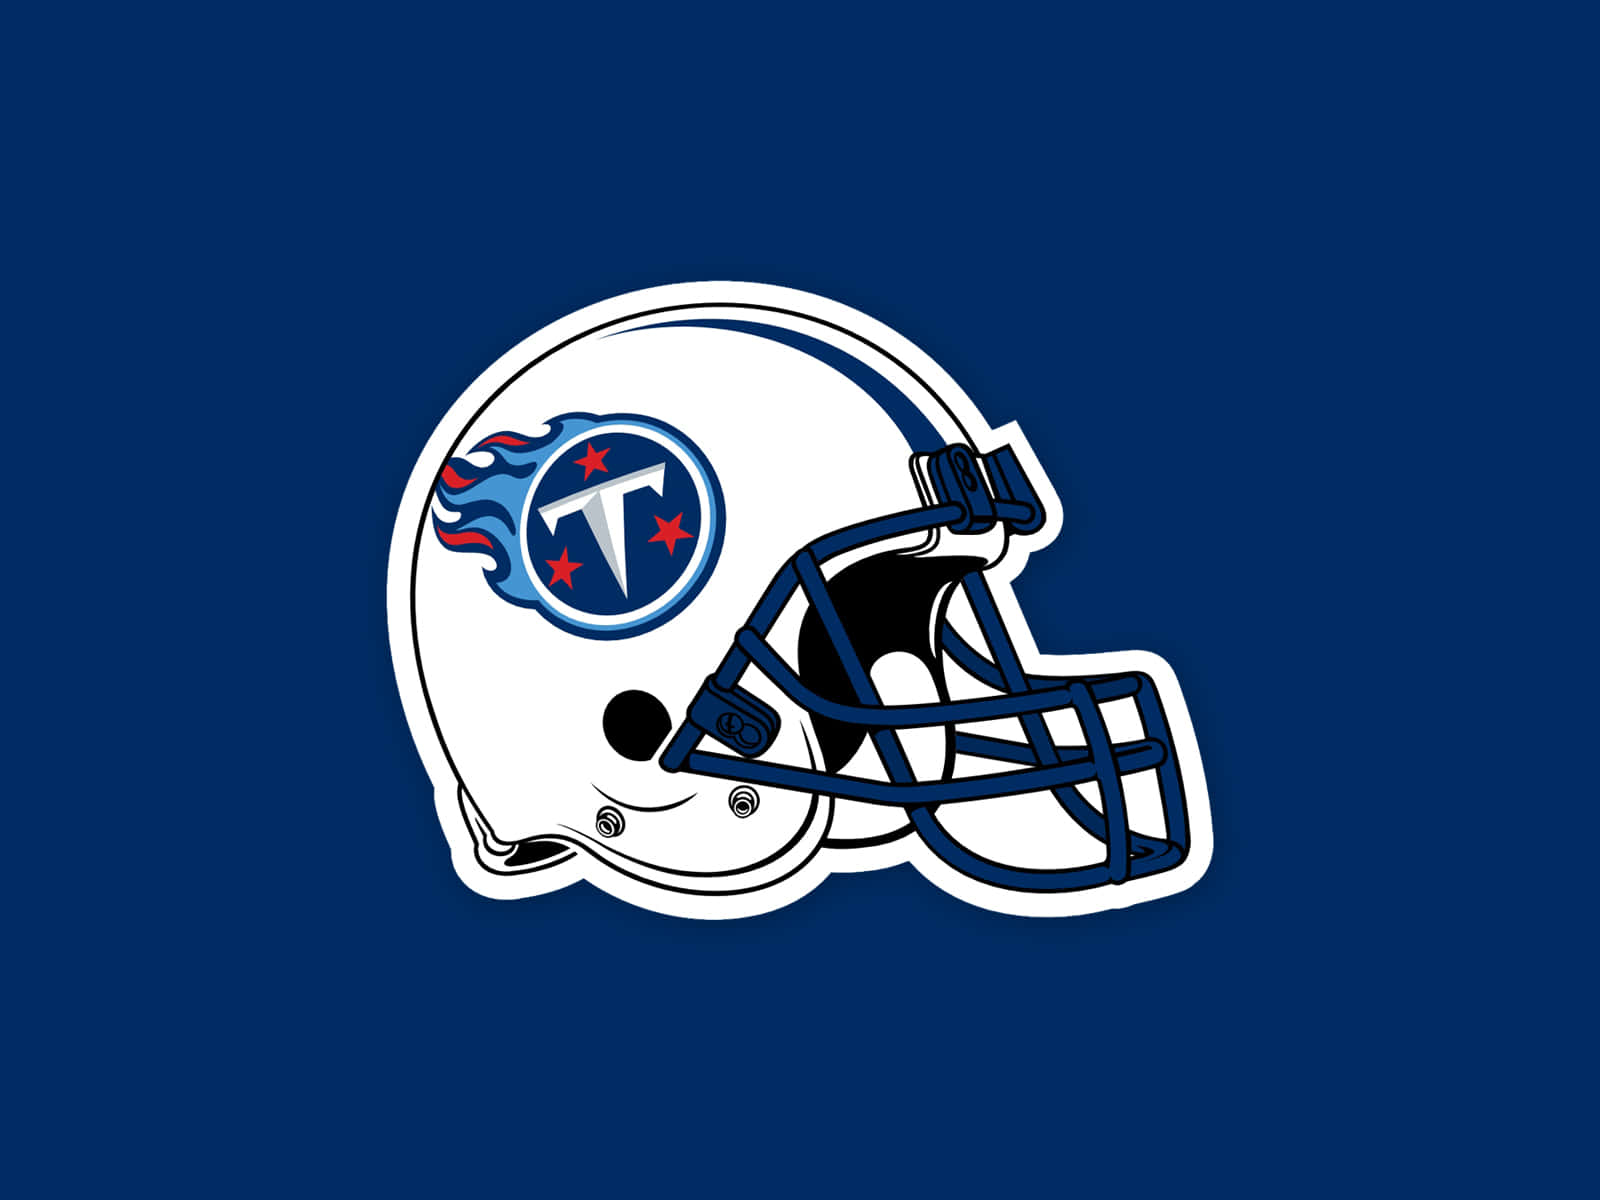 “Show your passion for the Tn Titans!” Wallpaper